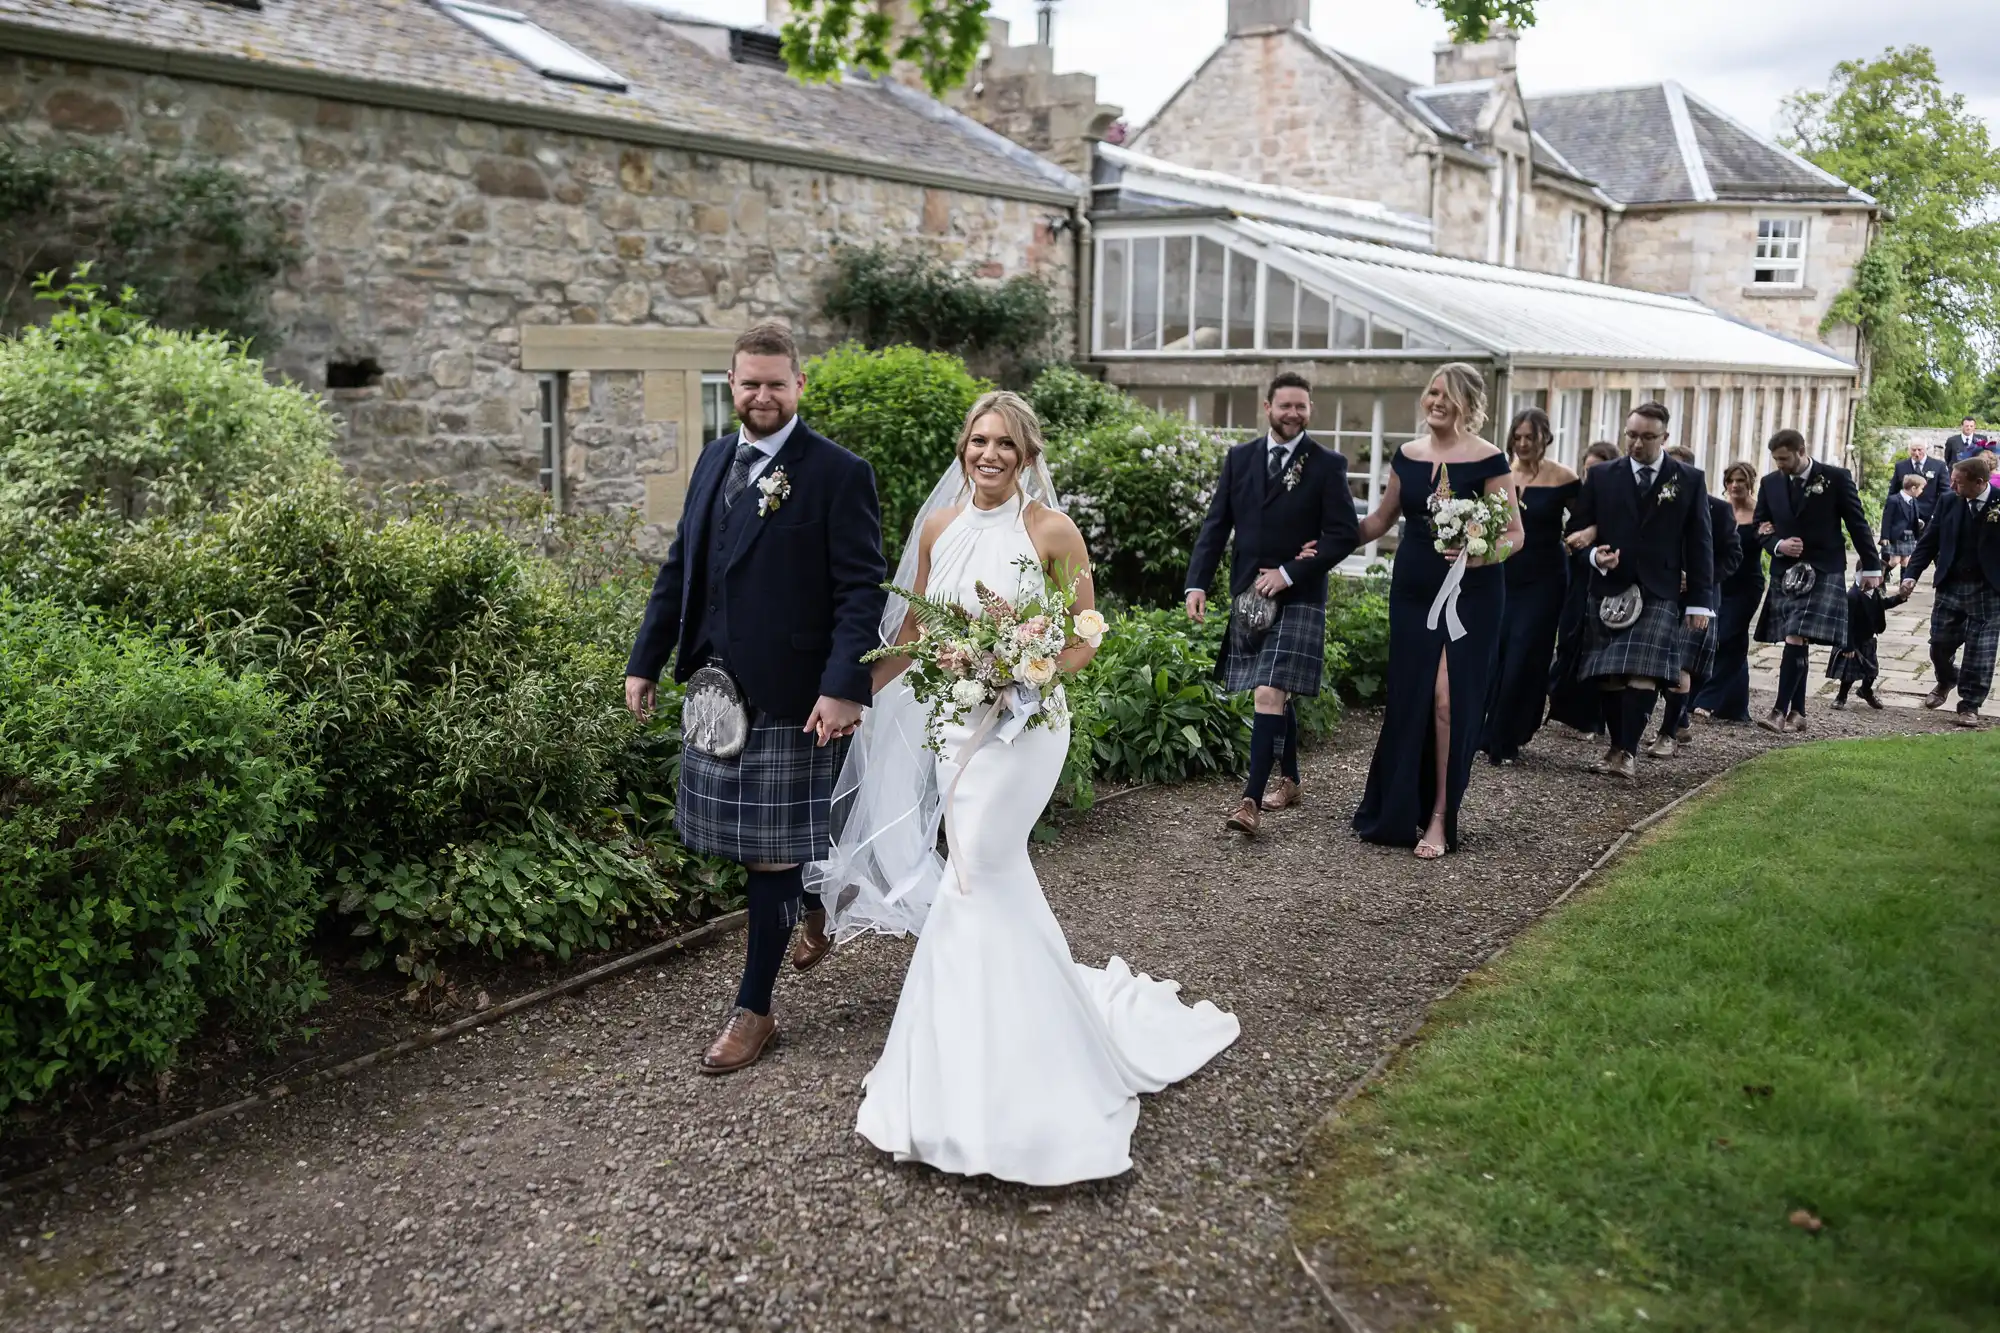 A newlywed couple leads a group while walking along a garden path, the groom wearing a kilt and the bride in a white gown.